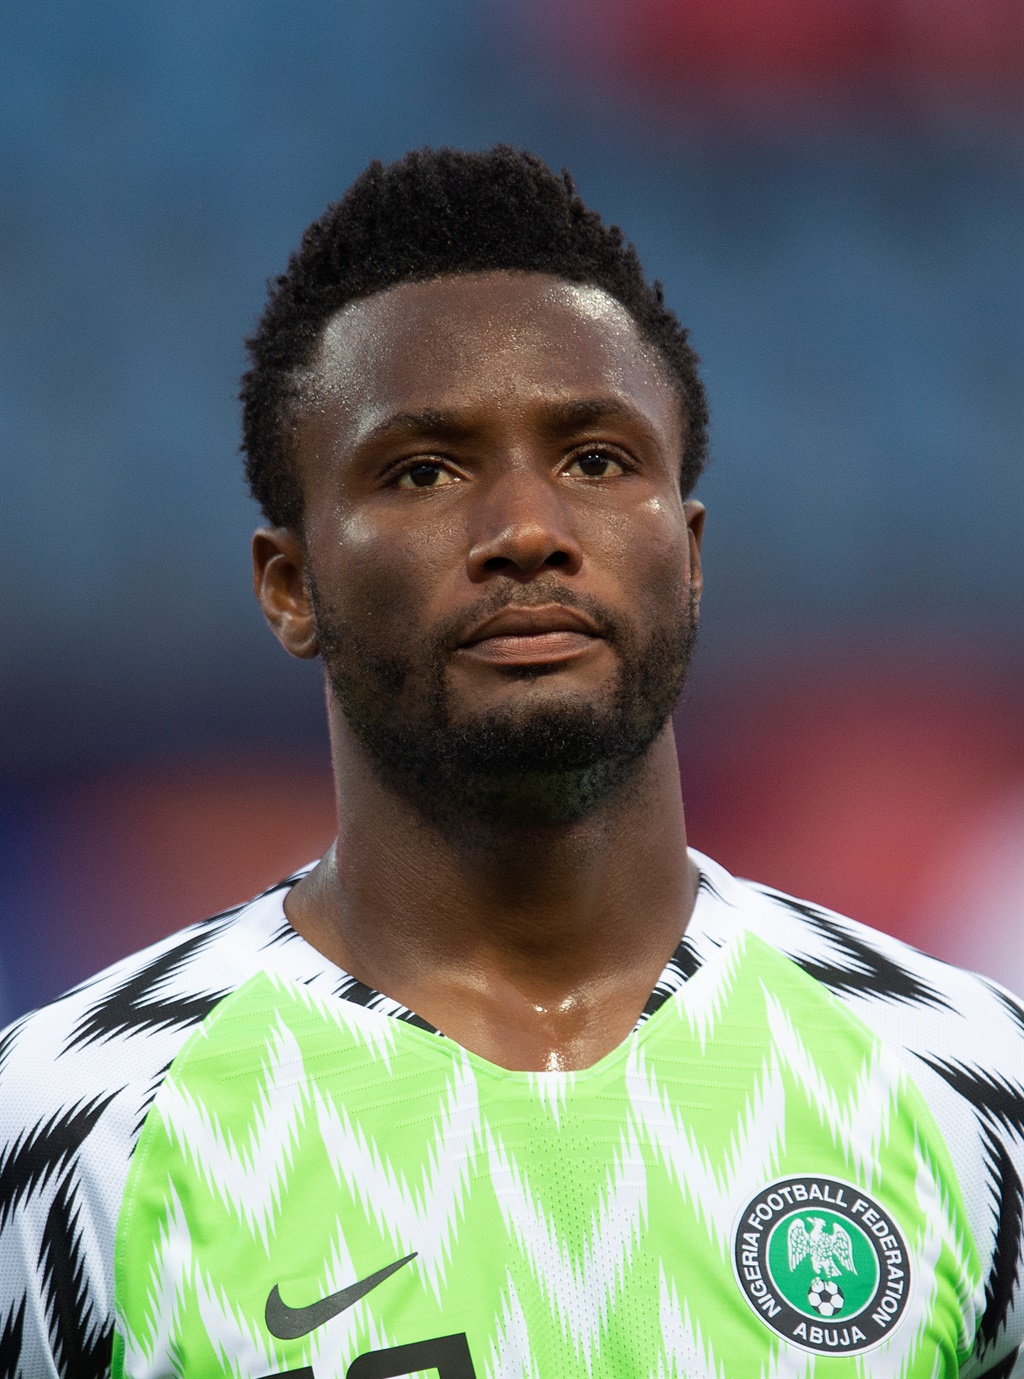 John Obi Mikel will likely play his final Afcon game for Nigeria.
Photo: Getty Images.